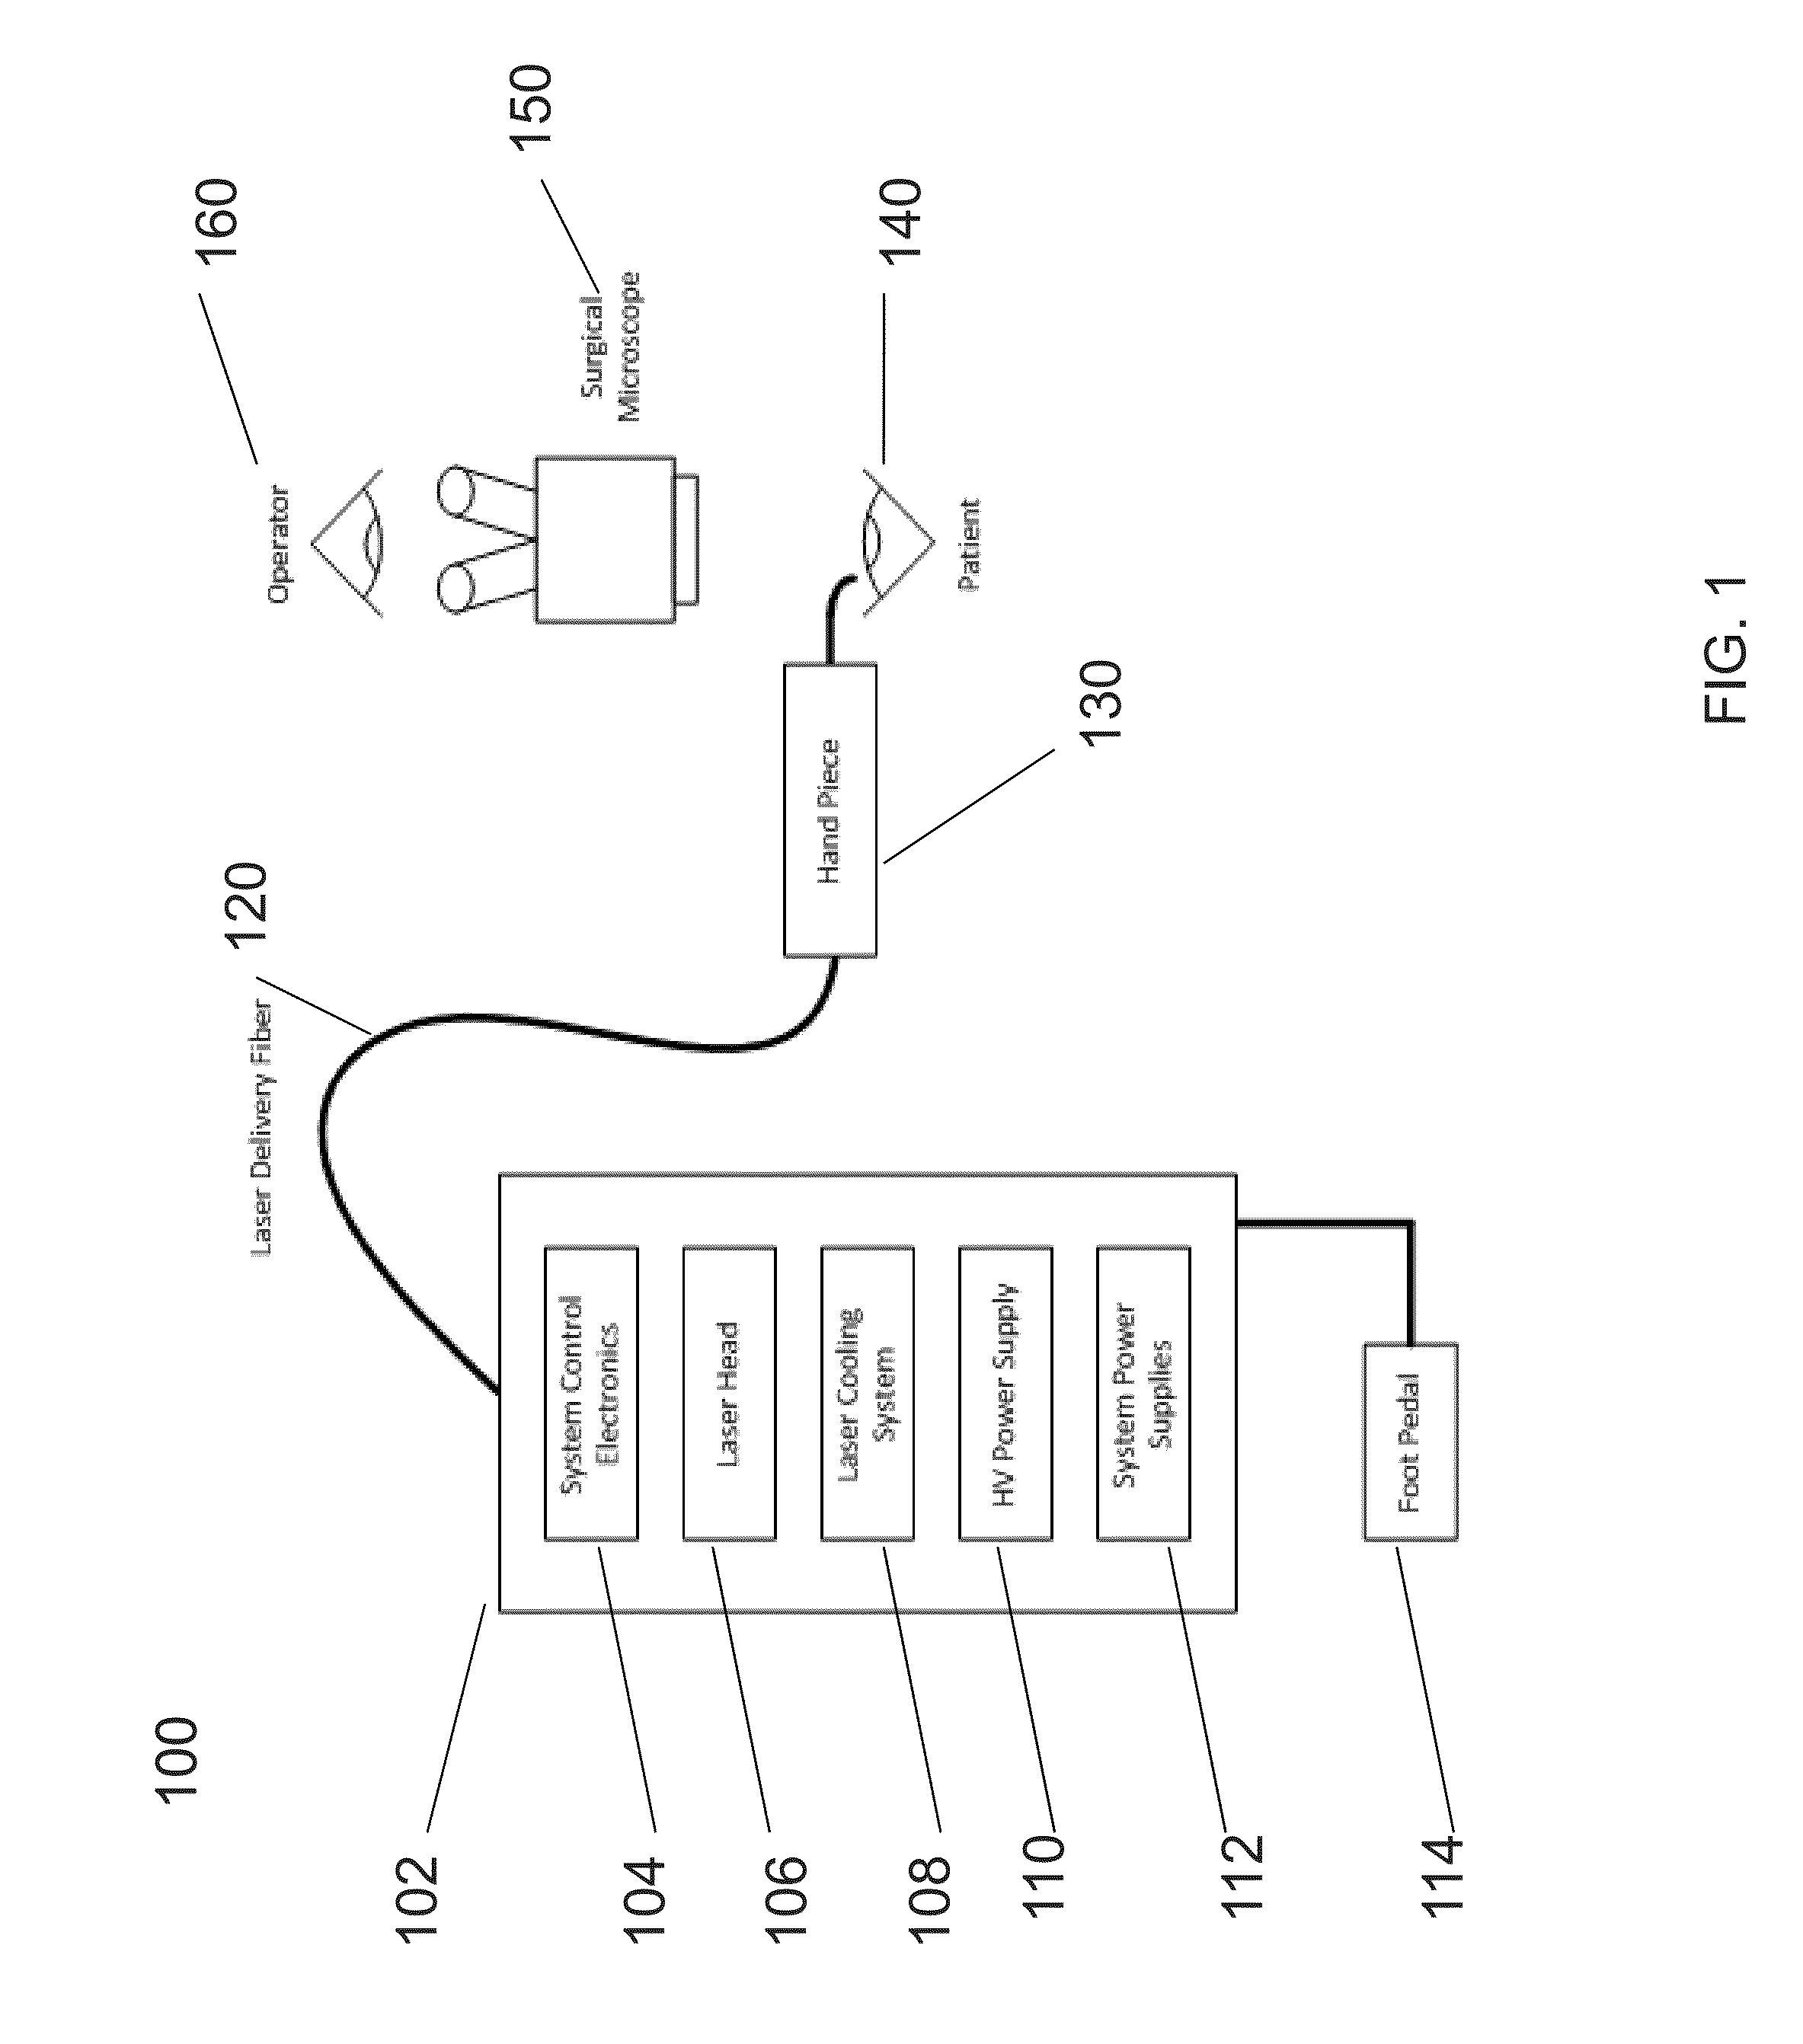 Systems and methods for affecting the biomechanical properties of connective tissue